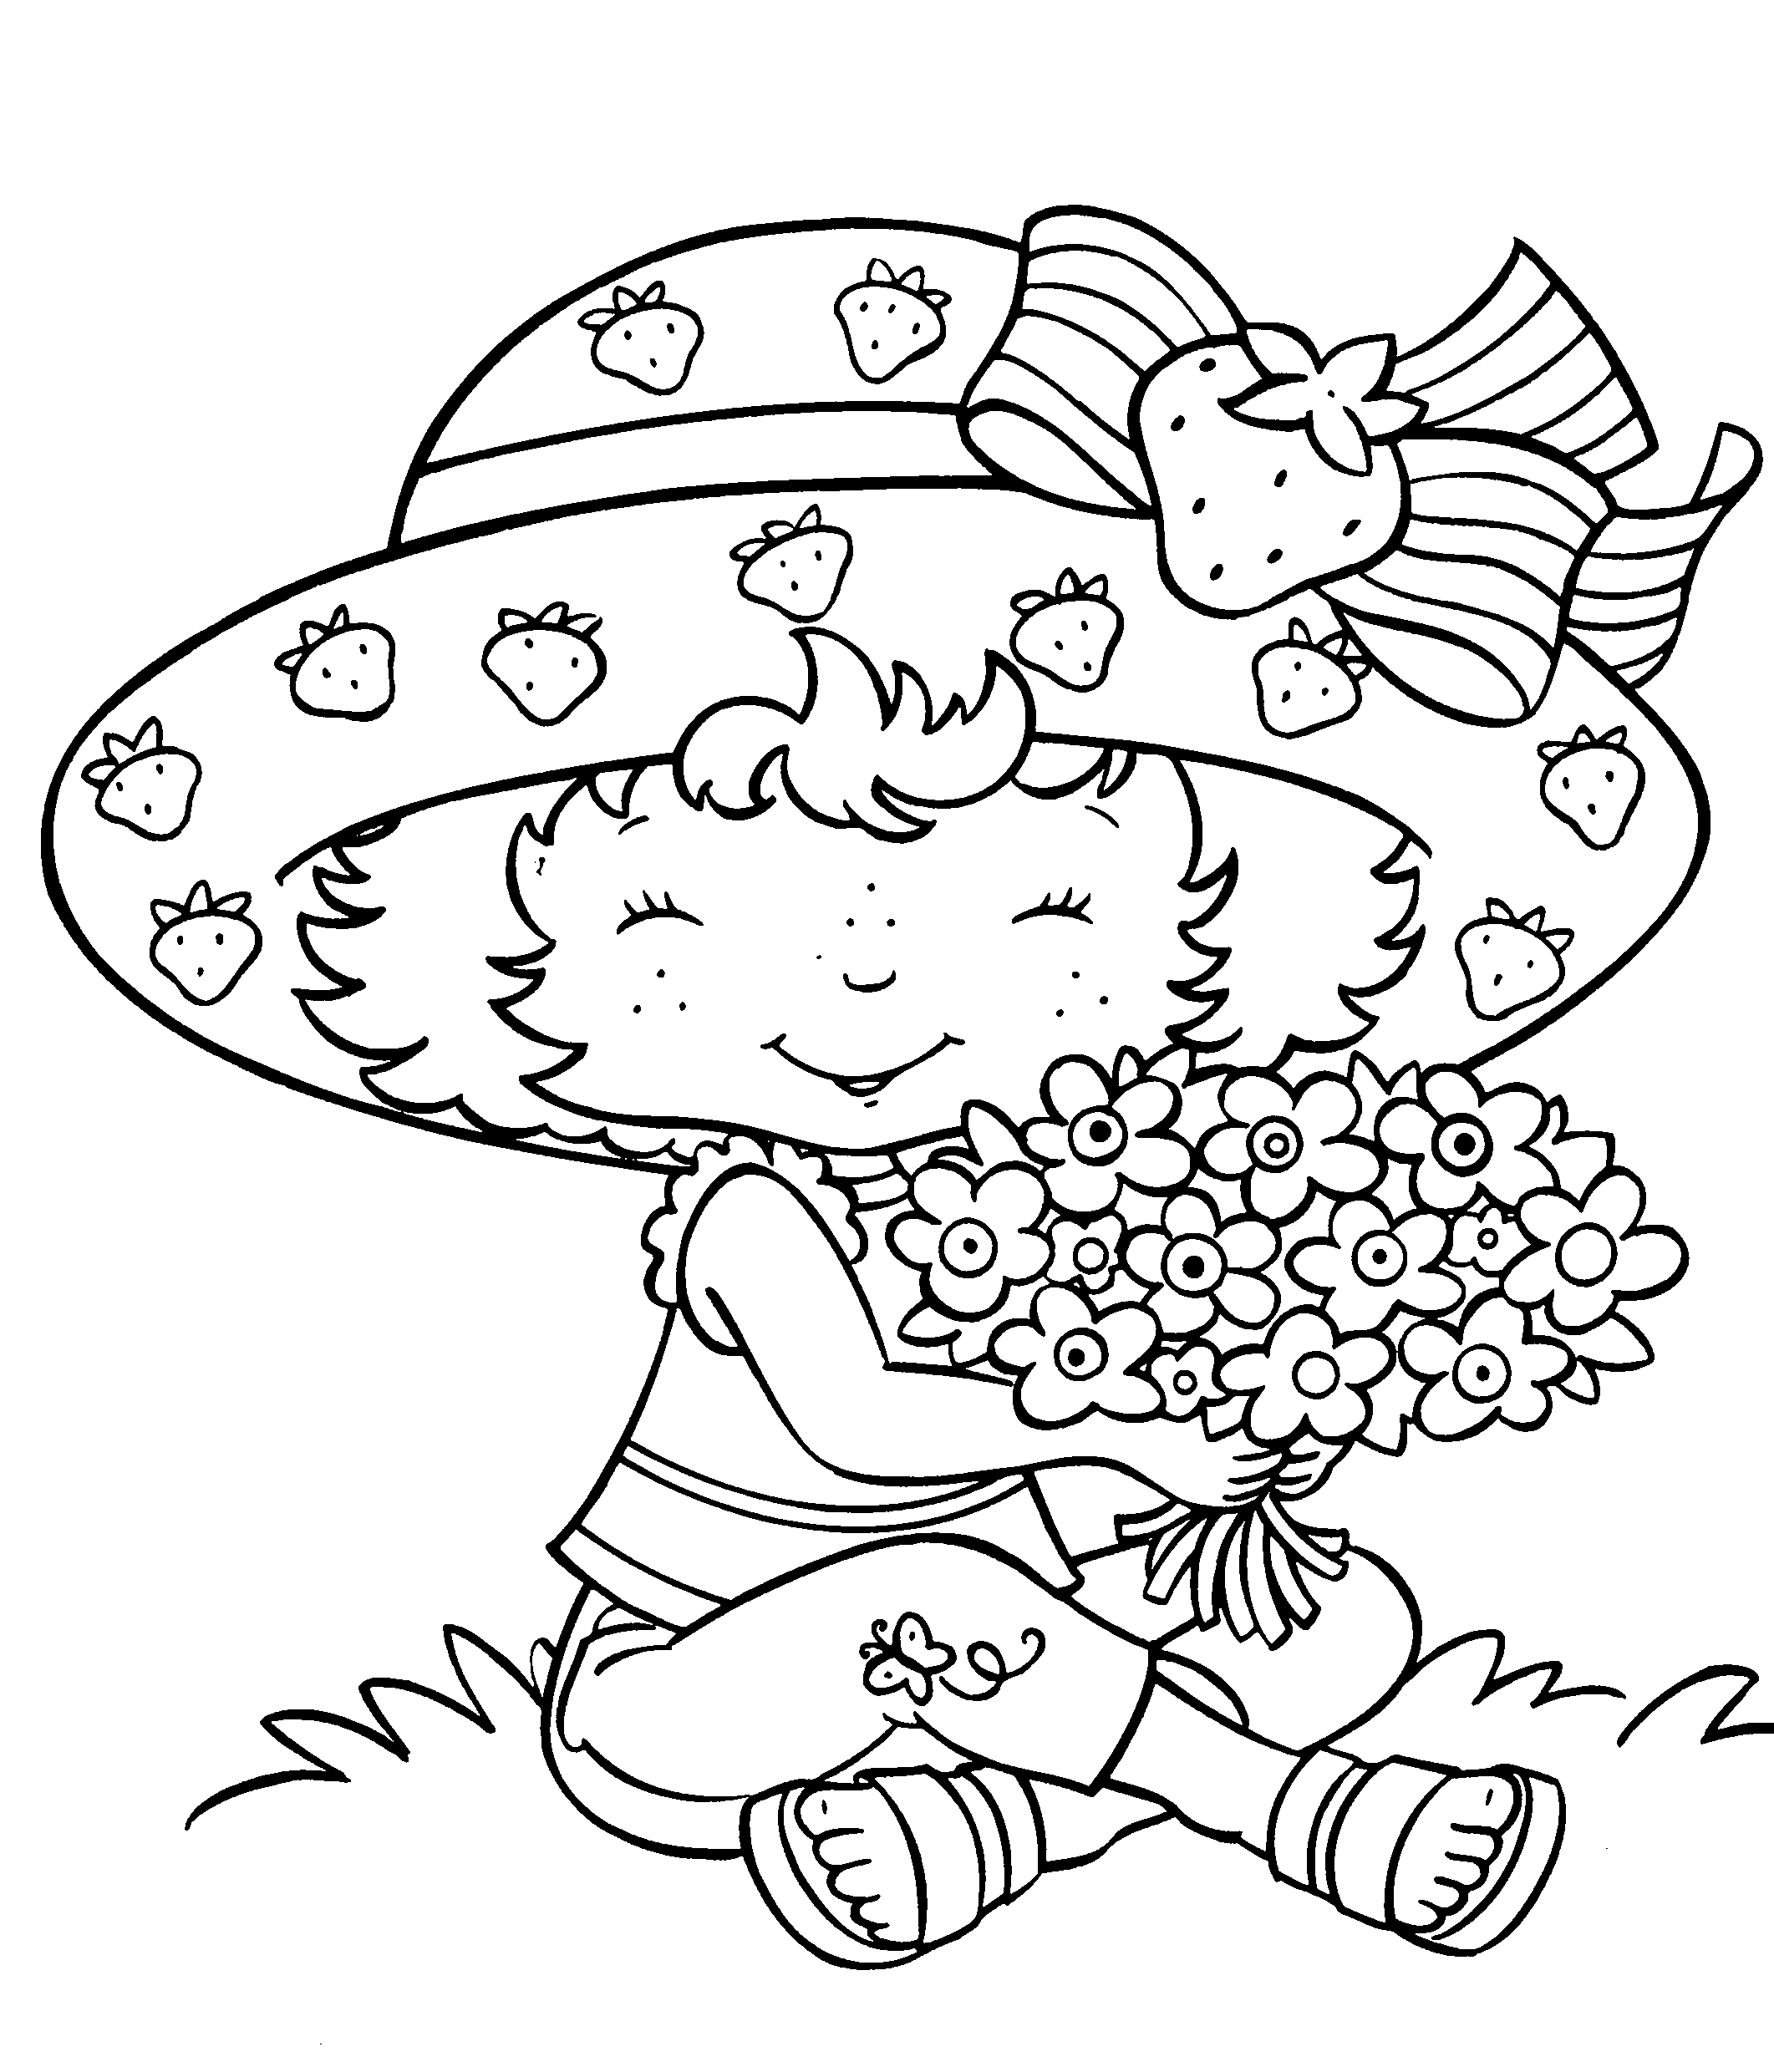 strawberry coloring pages strawberry plant drawing at getdrawingscom free for pages strawberry coloring 